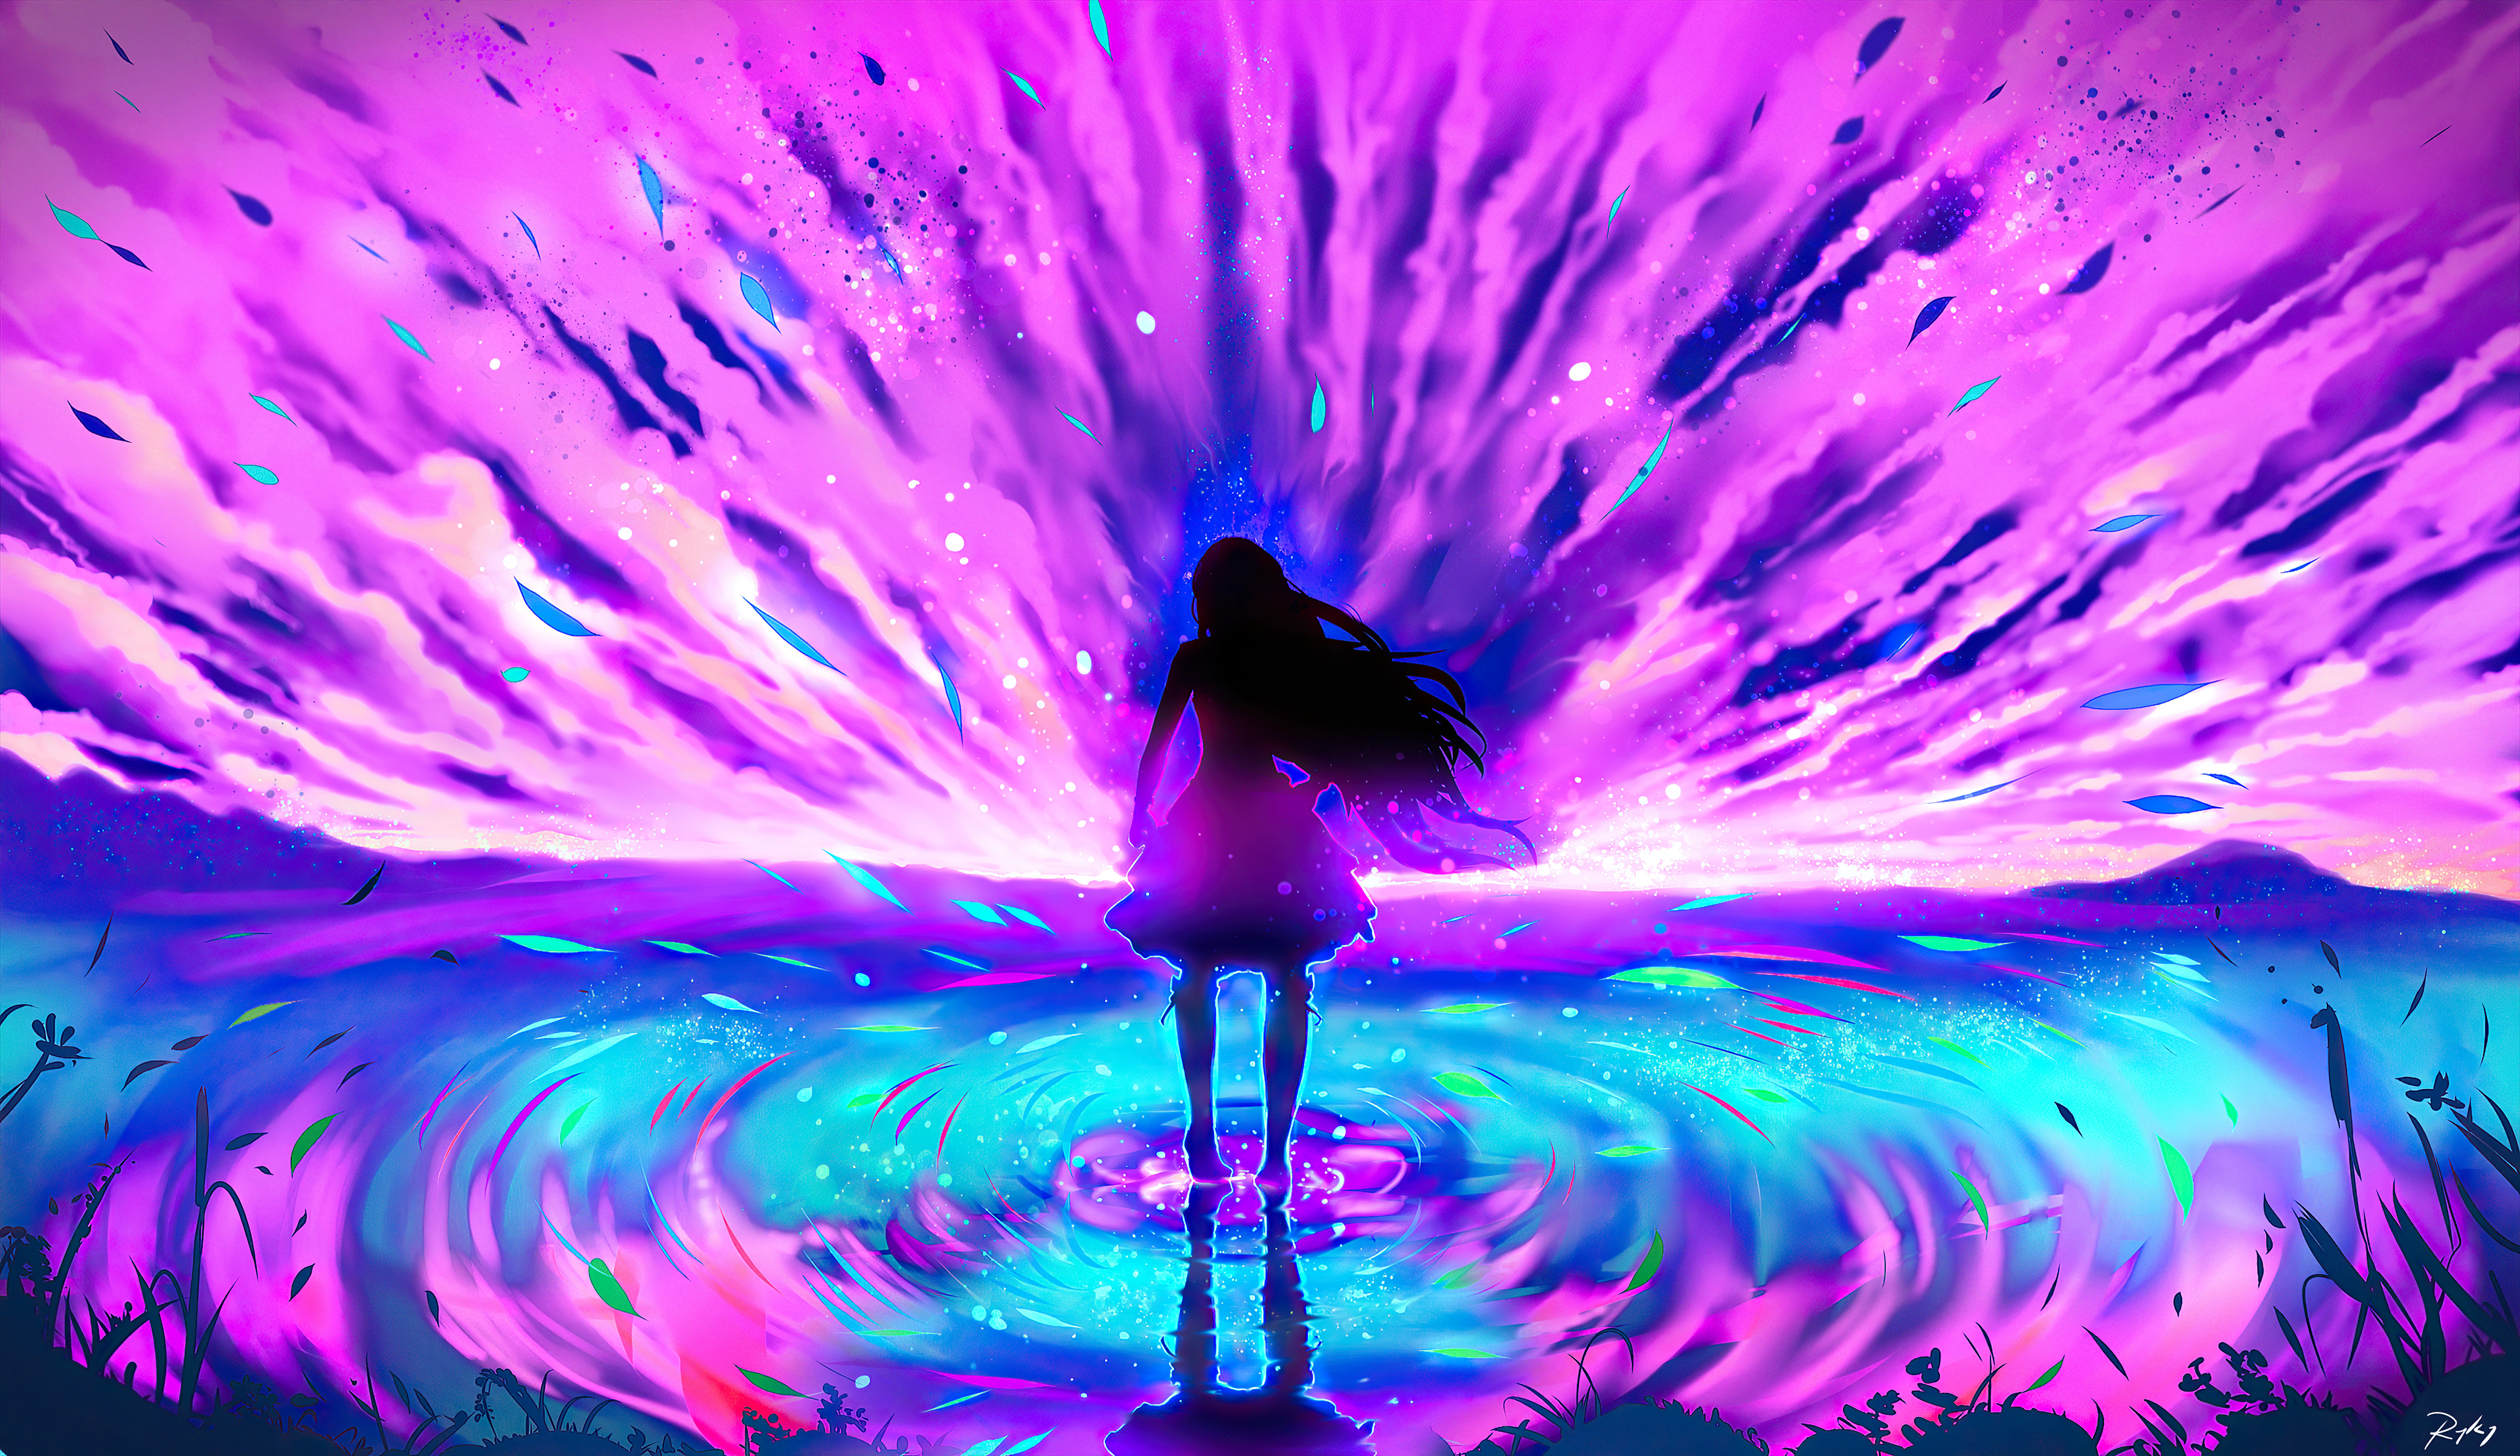 2560x1700 Girl Pink Reflection Waves 4k Chromebook Pixel Hd 4k Wallpapers Images Backgrounds Photos And Pictures Right now we have 90+ background pictures, but the number of images is growing, so add the webpage to bookmarks and. 2560x1700 girl pink reflection waves 4k